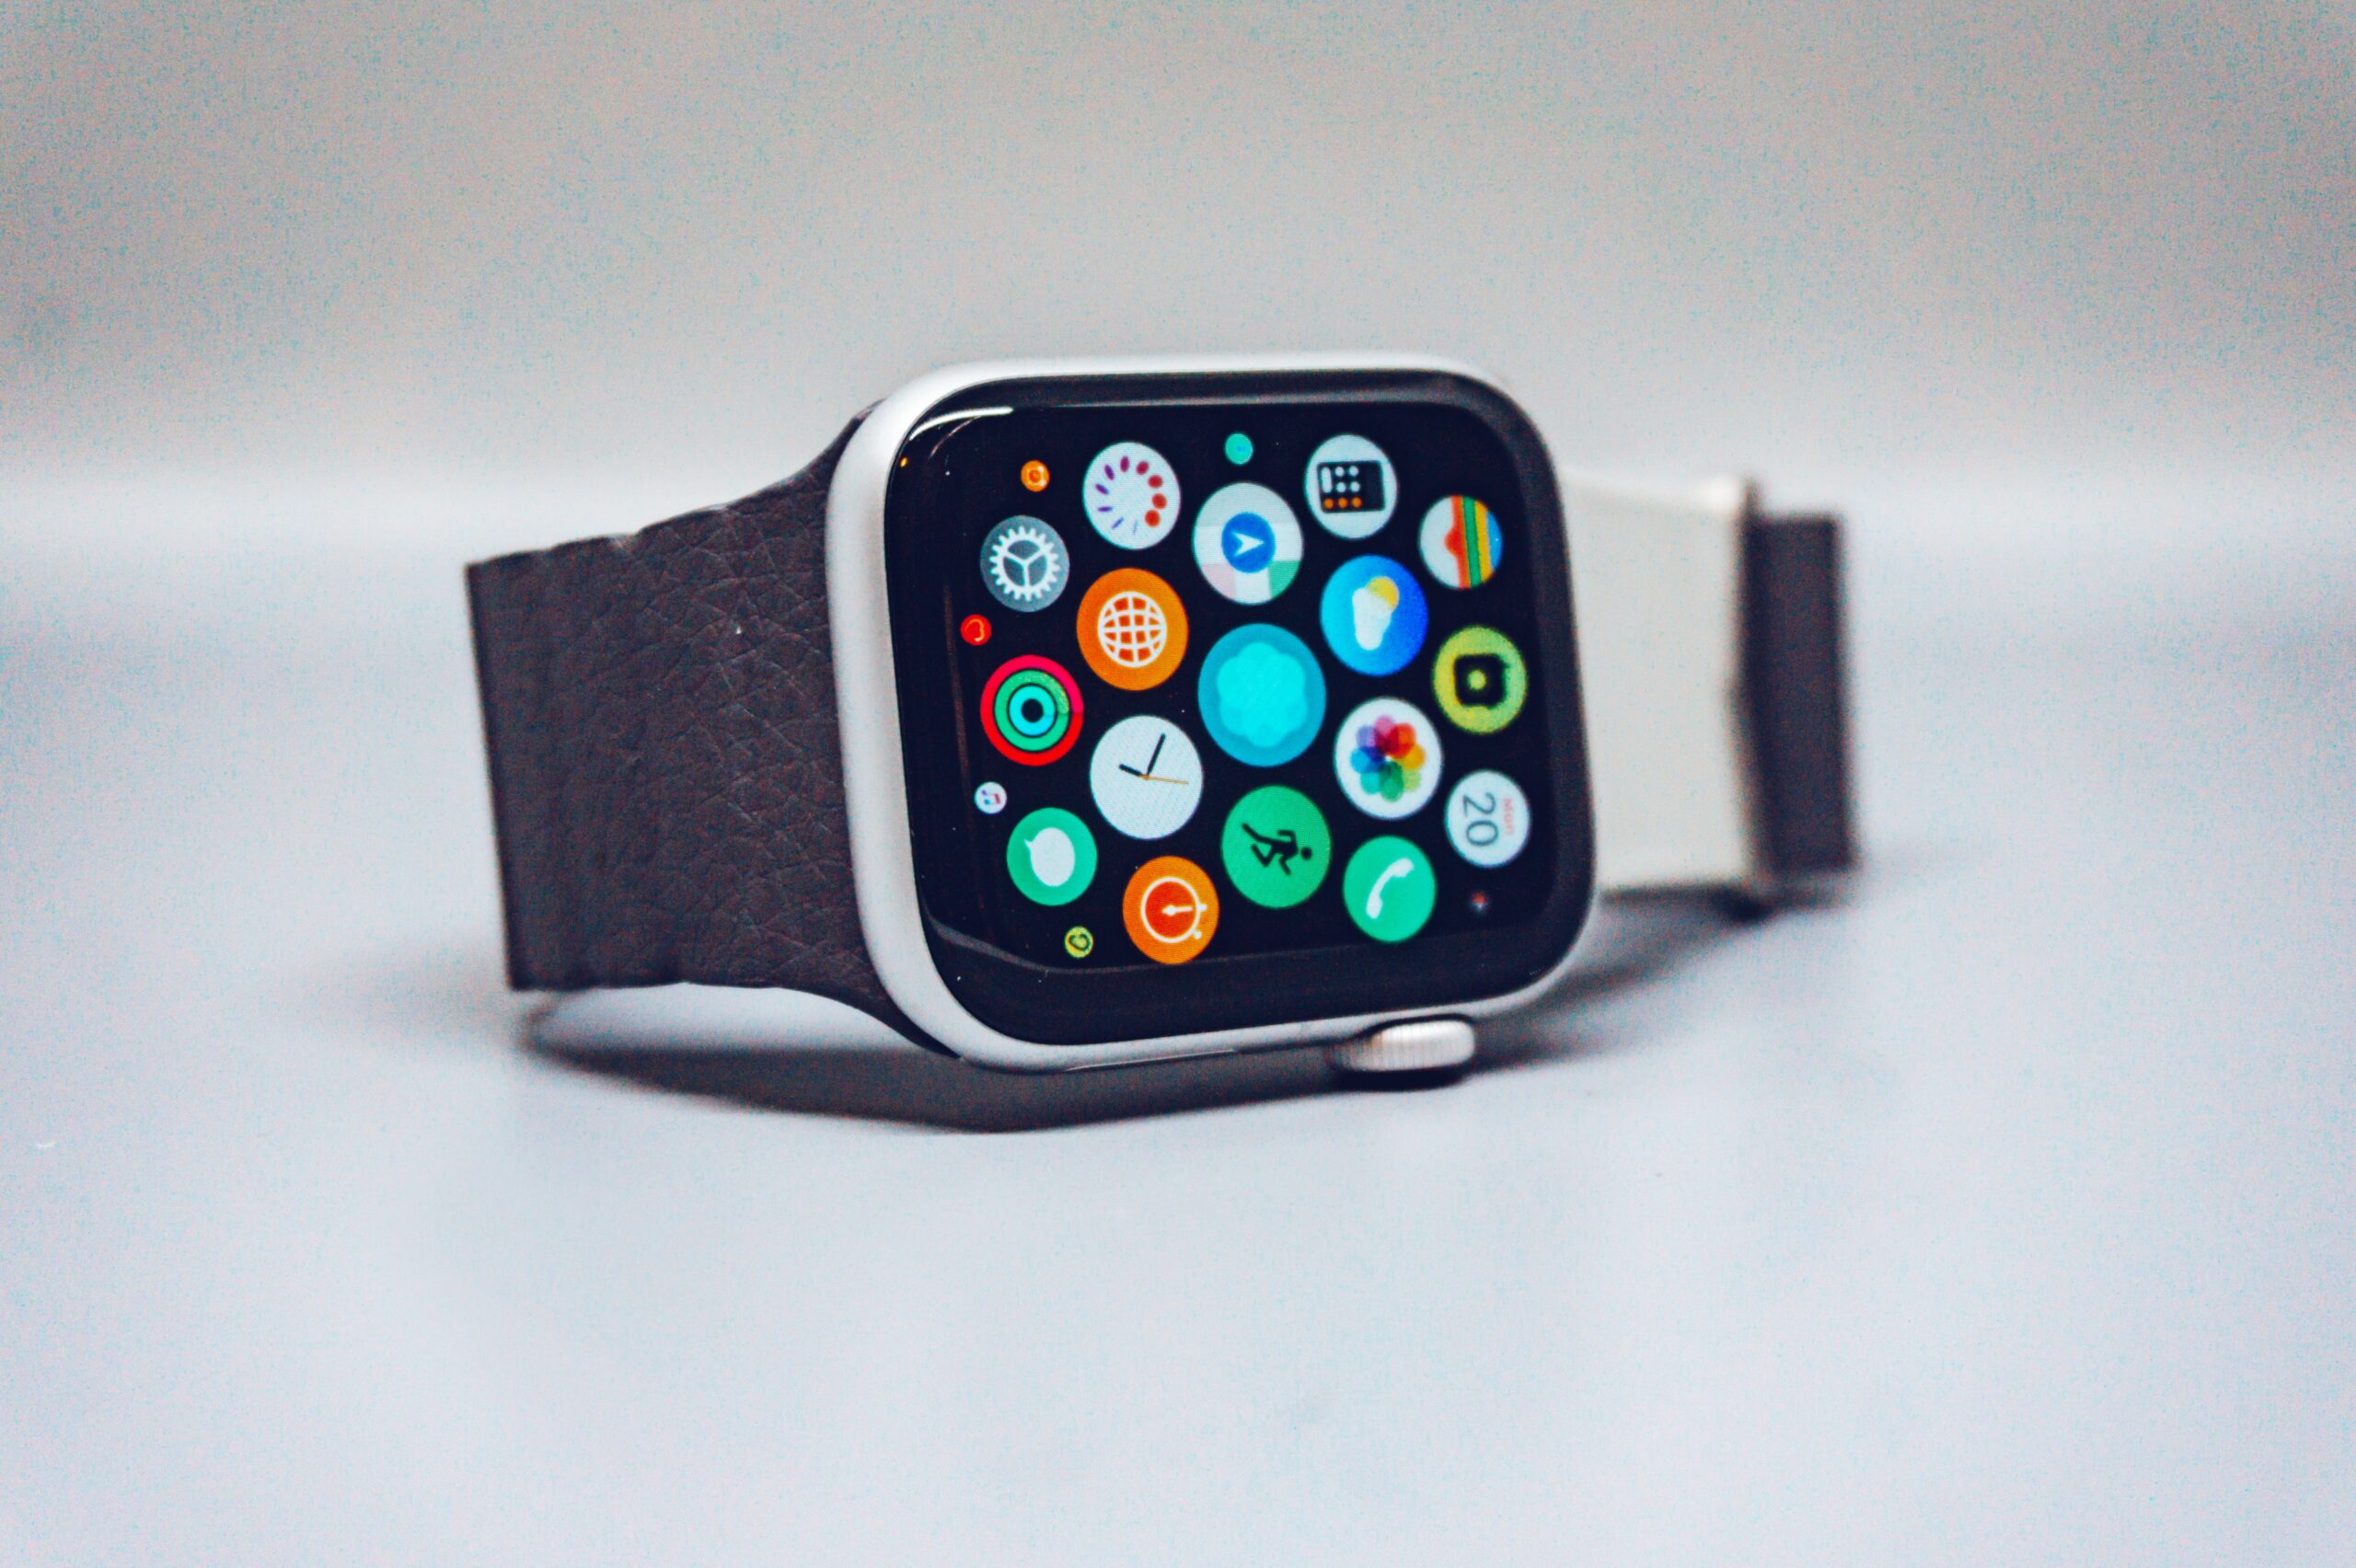 How to Close Apps on Apple Watch